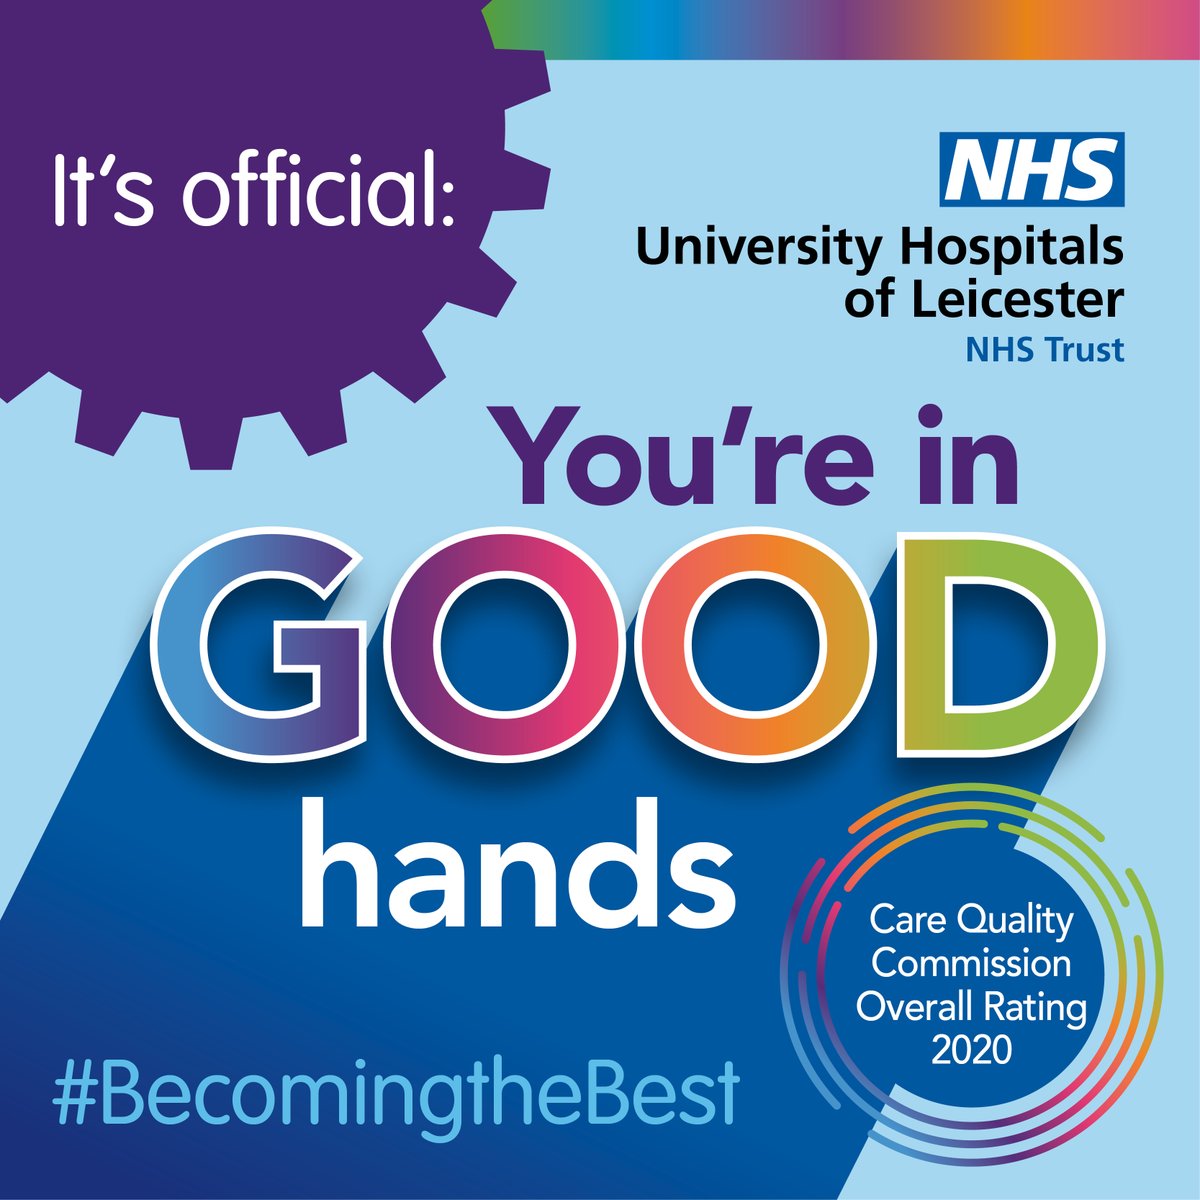 We’re GOOD! 🙌 The CQC have rated our Trust as GOOD, a testament to the hard work and dedication shown by our staff each and every day. Go #TeamUHL #BecomingtheBest